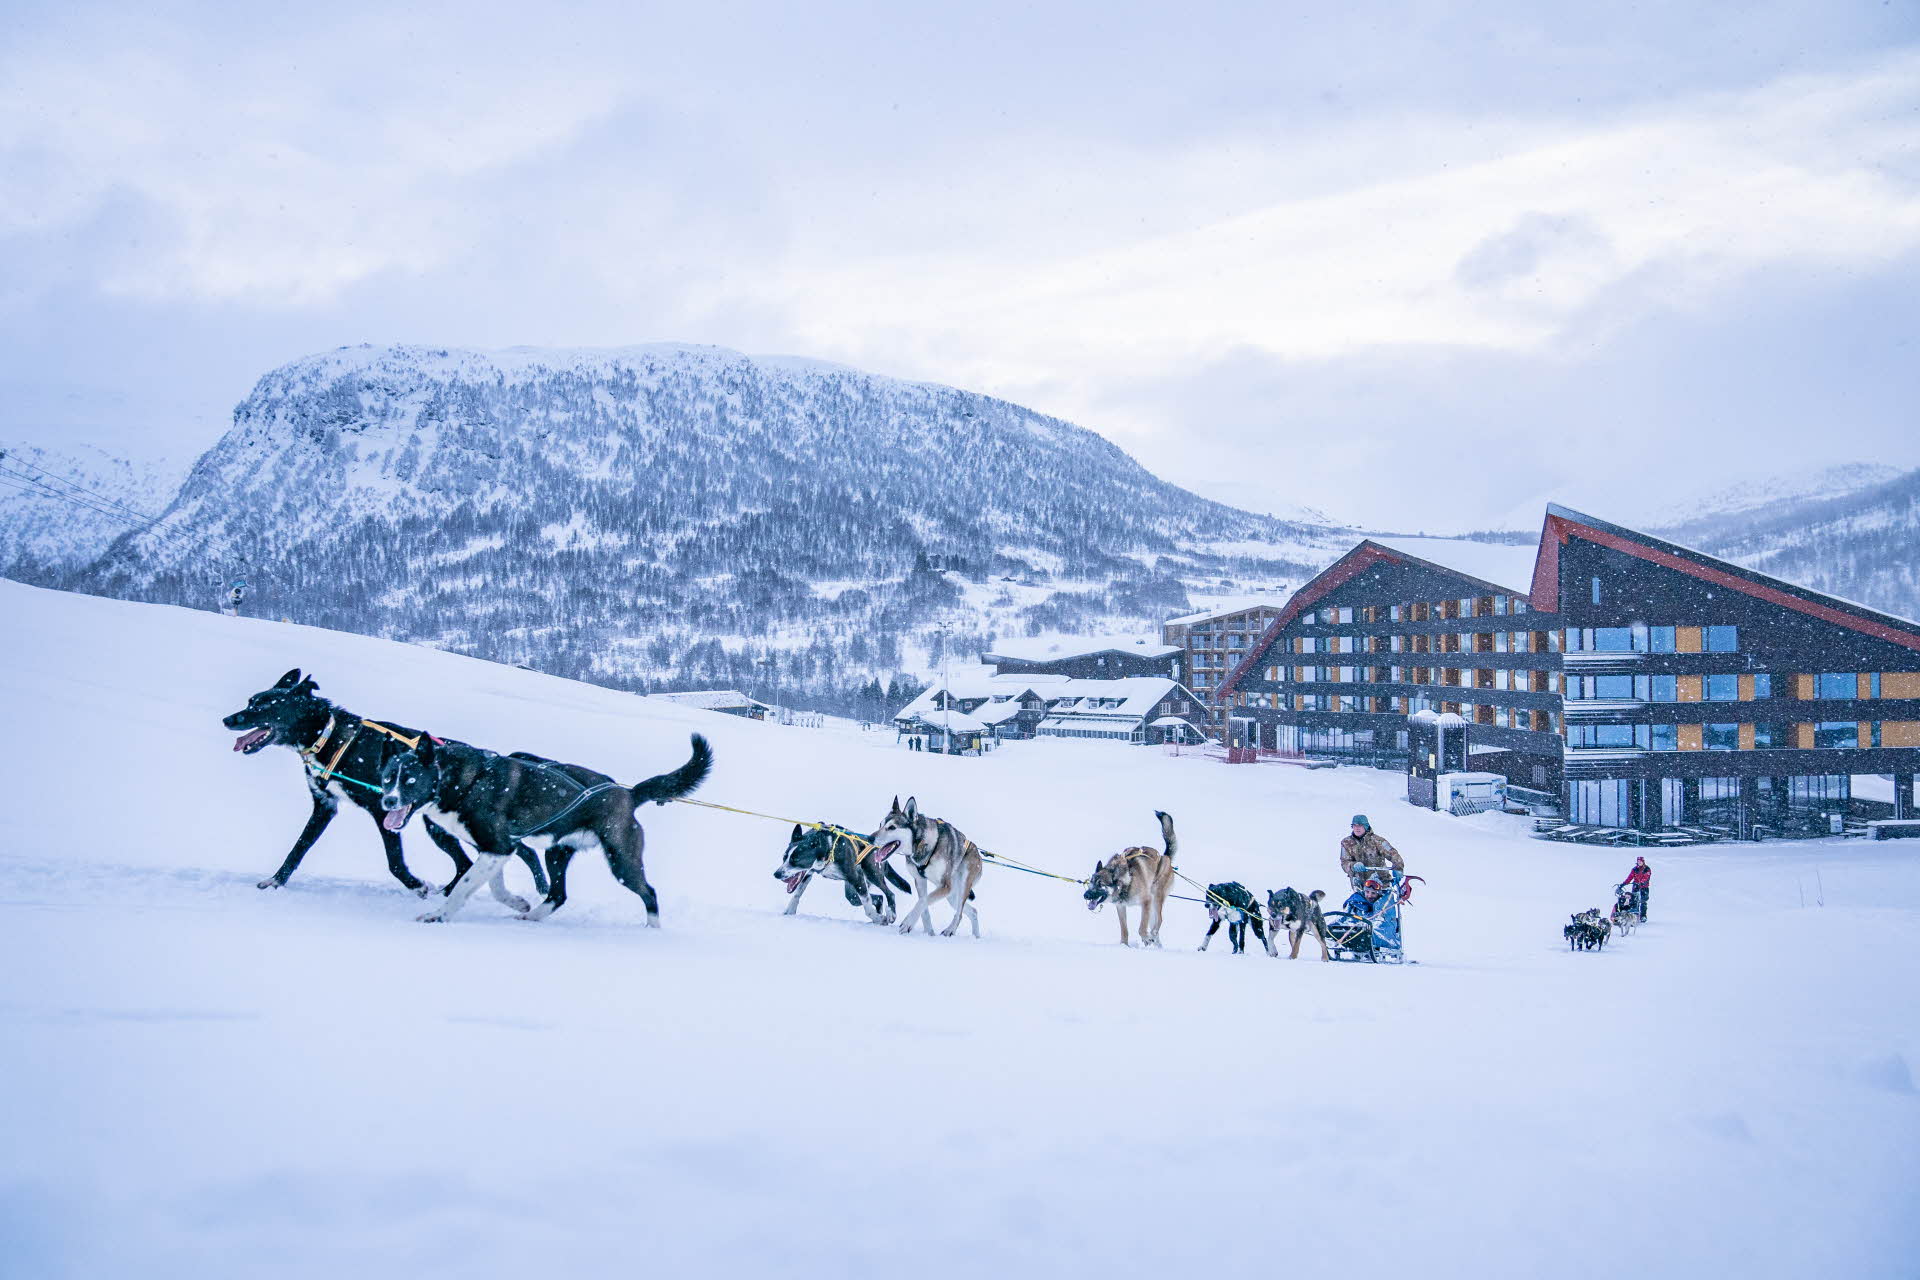 Husky dogs pulling a sledge up a hill from the Myrkdalen Hotel with snow-covered mountains in the background